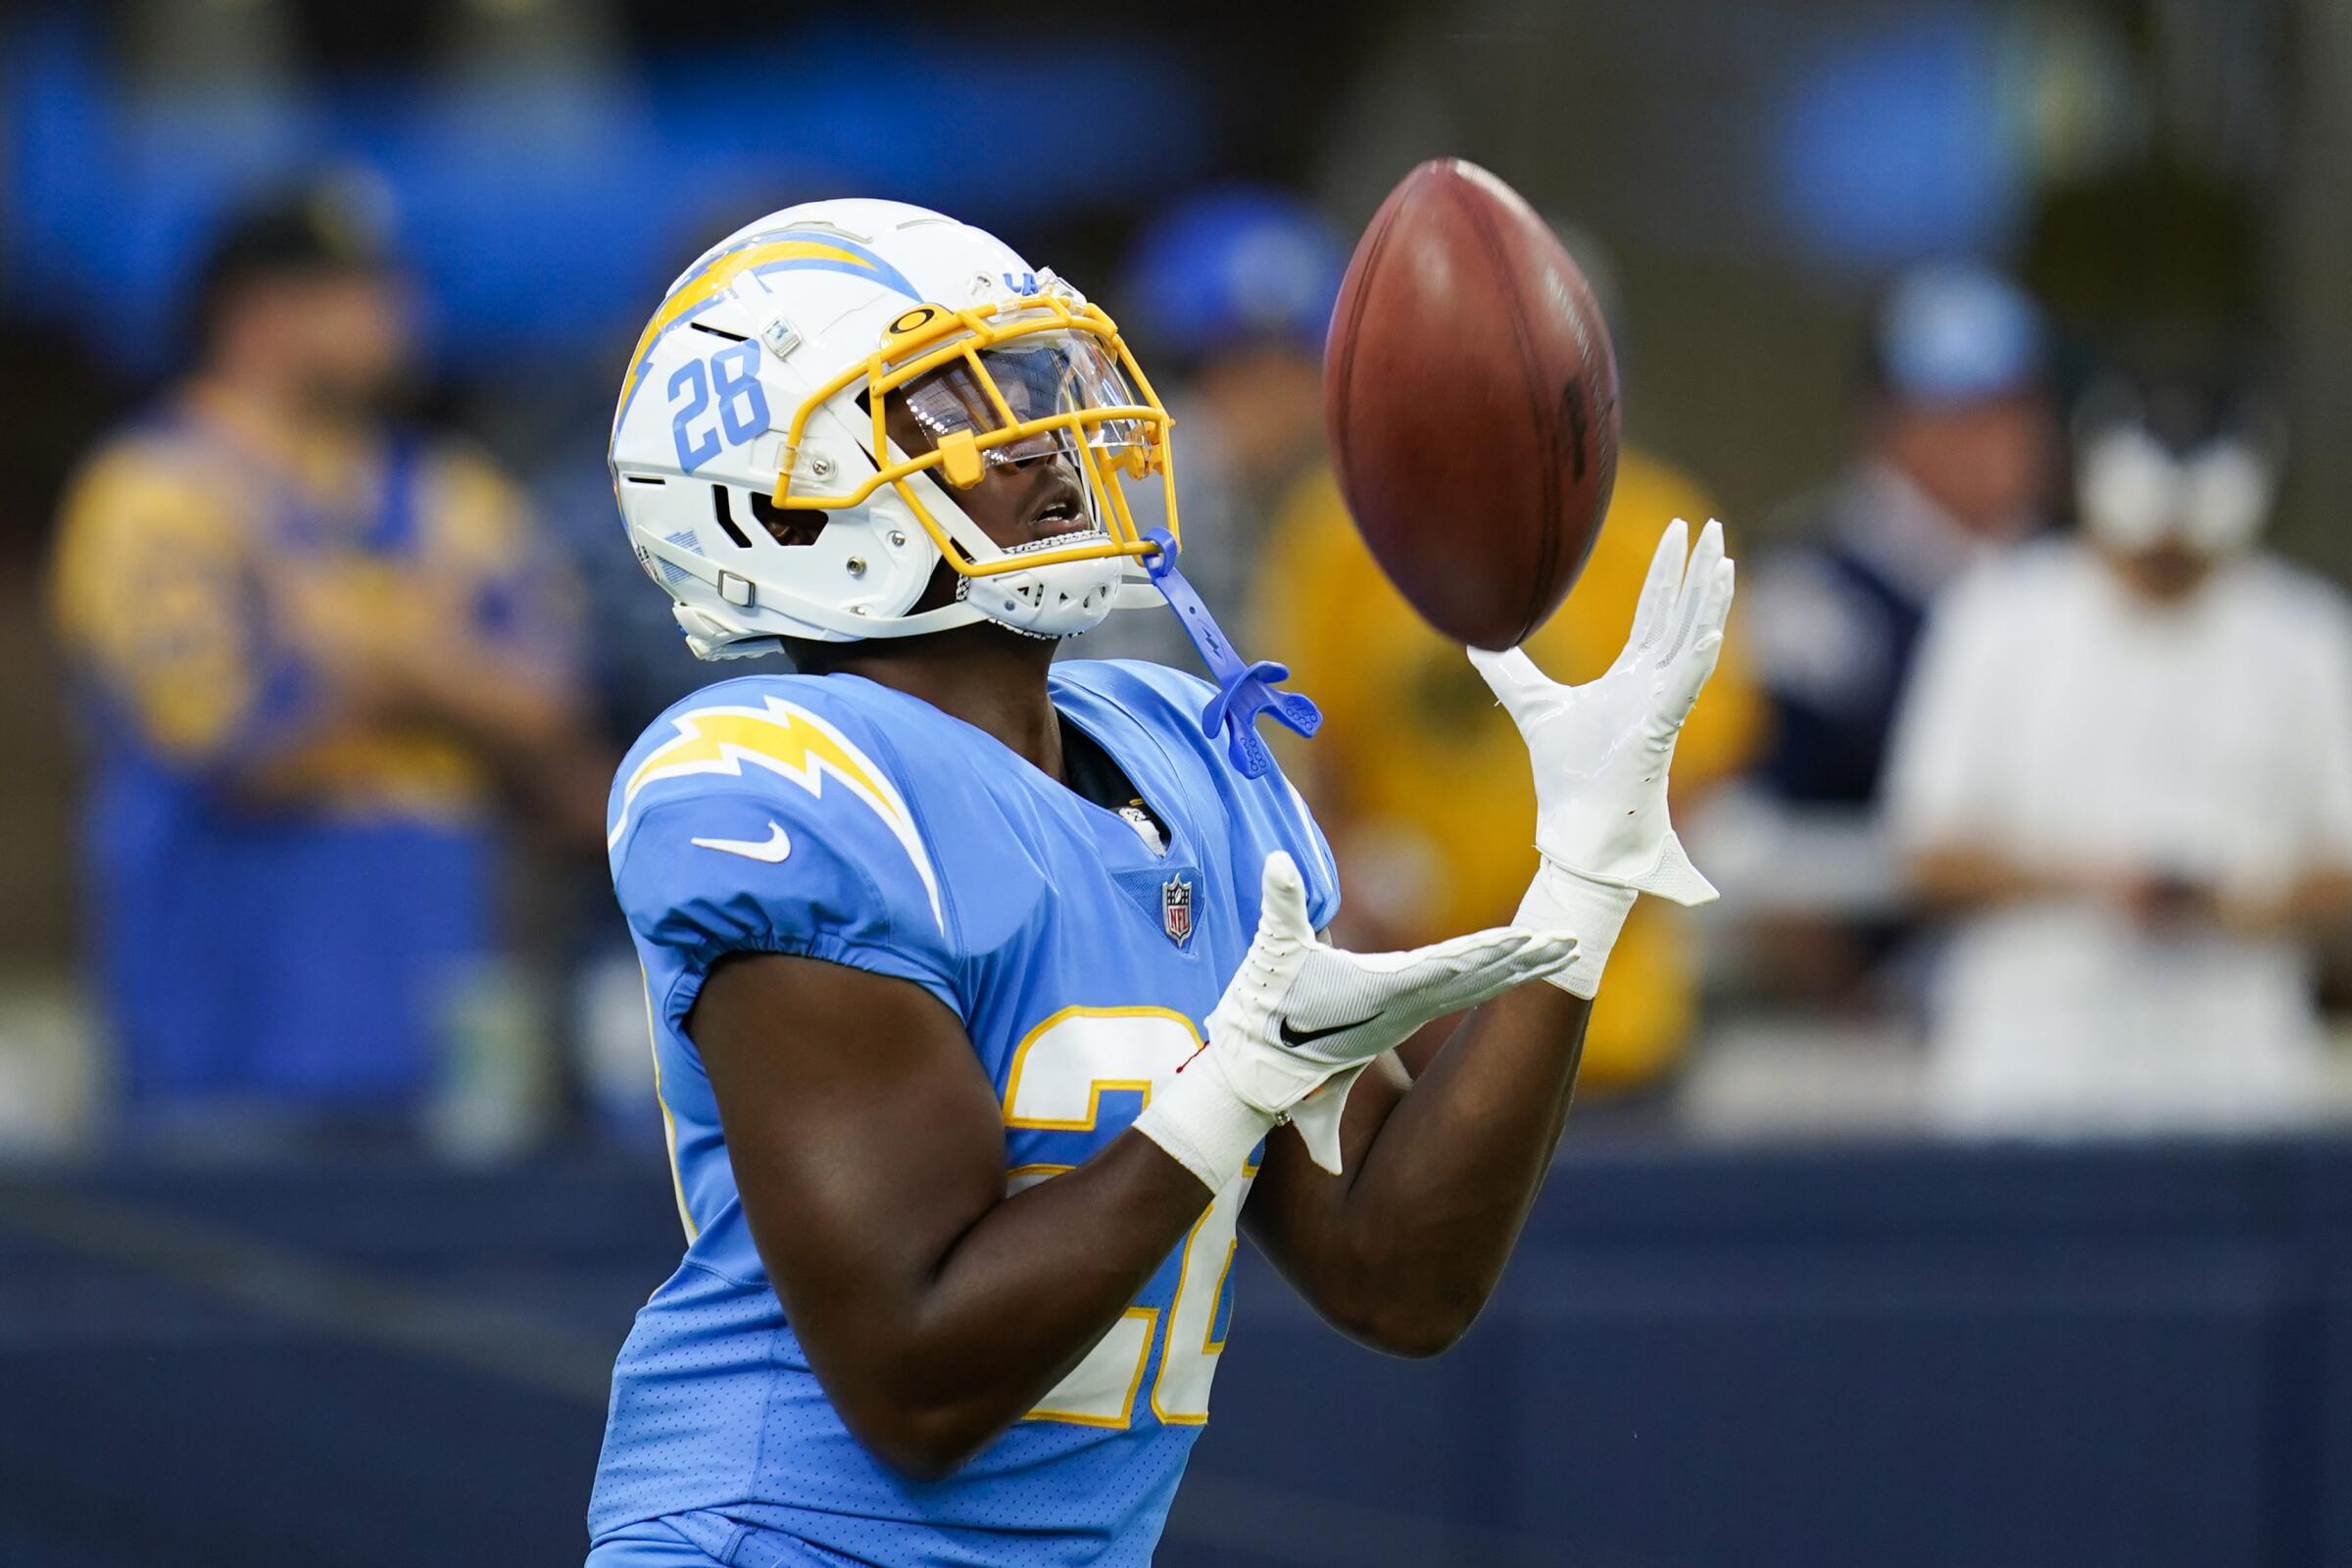 Chargers running back Isaiah Spiller warms up before a preseason game against the Rams.